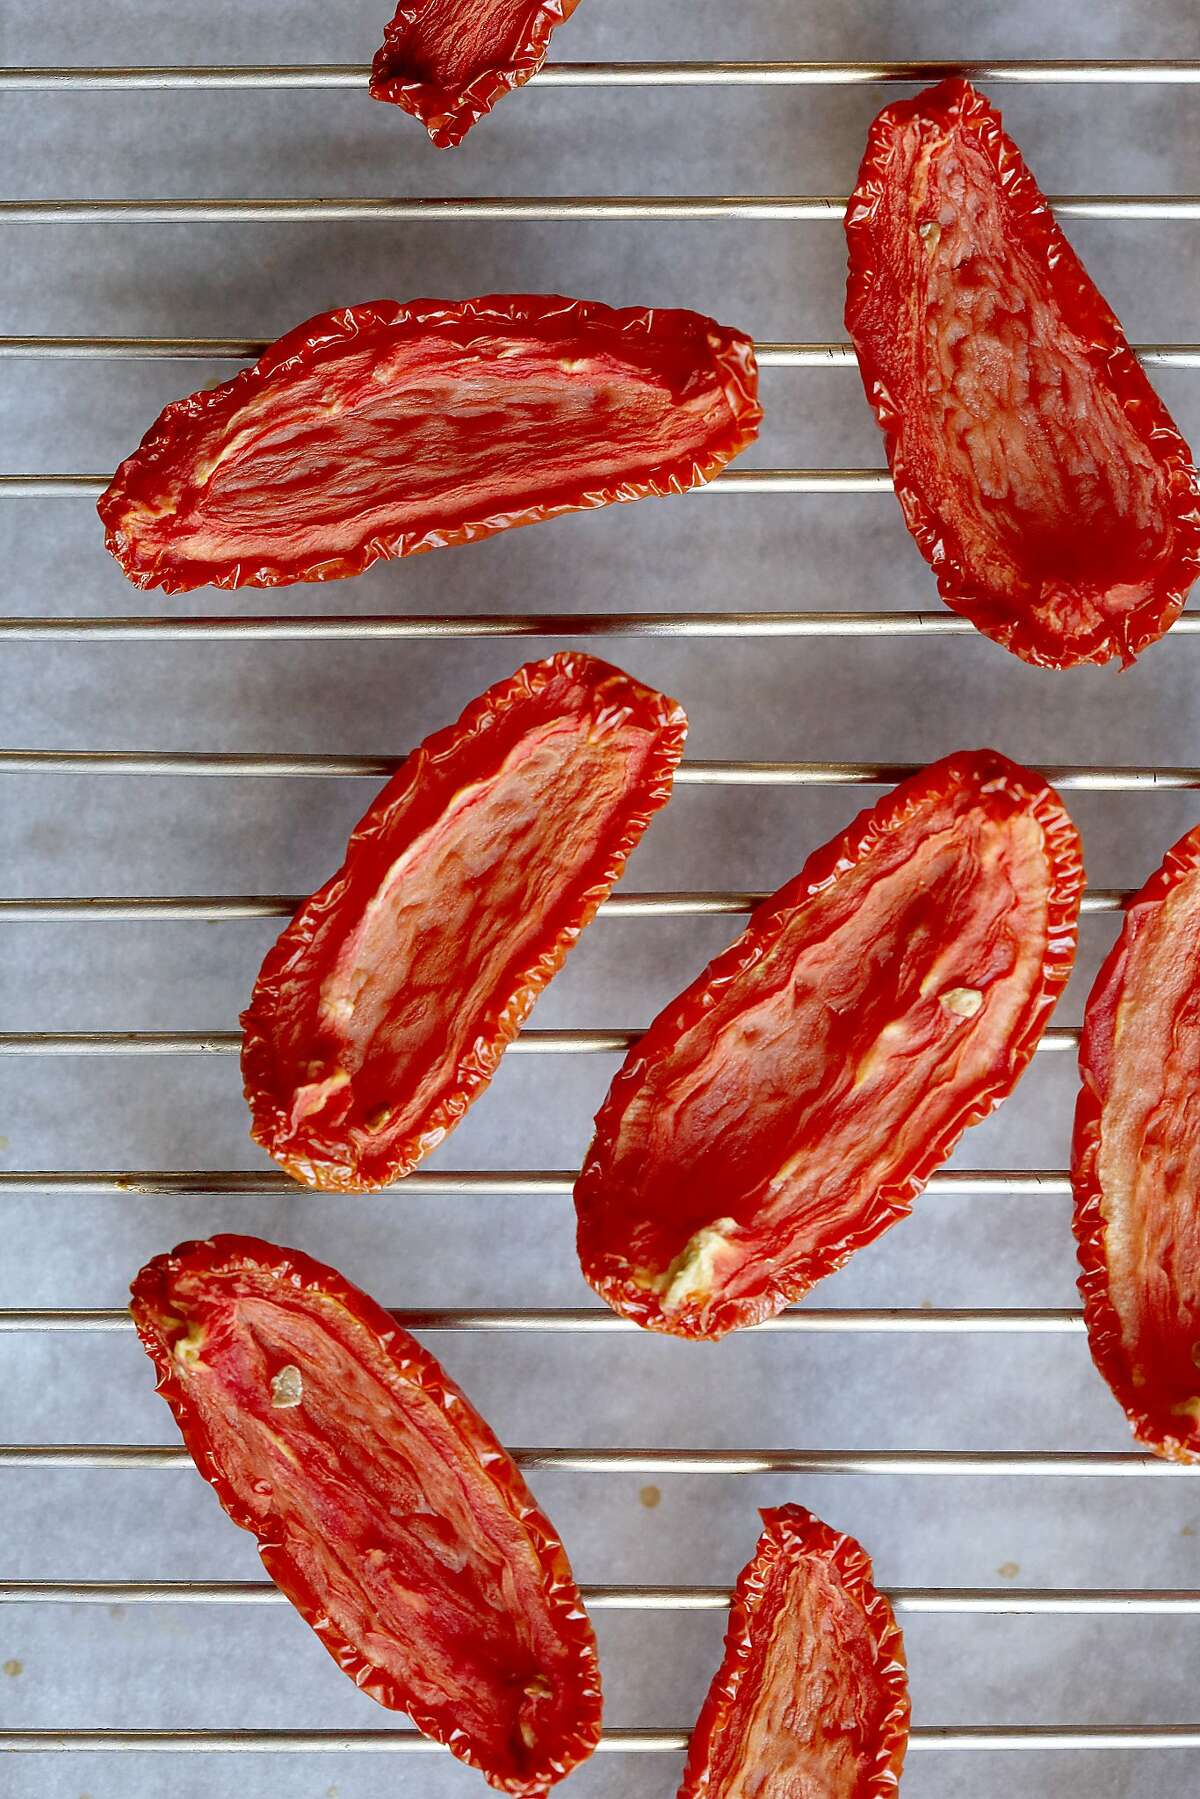 Oven-Dried Tomatoes - can then eat over a few days or preserve in olive oil for months made by Molly Watson in San Francisco, California, on Friday, June 12, 2015.